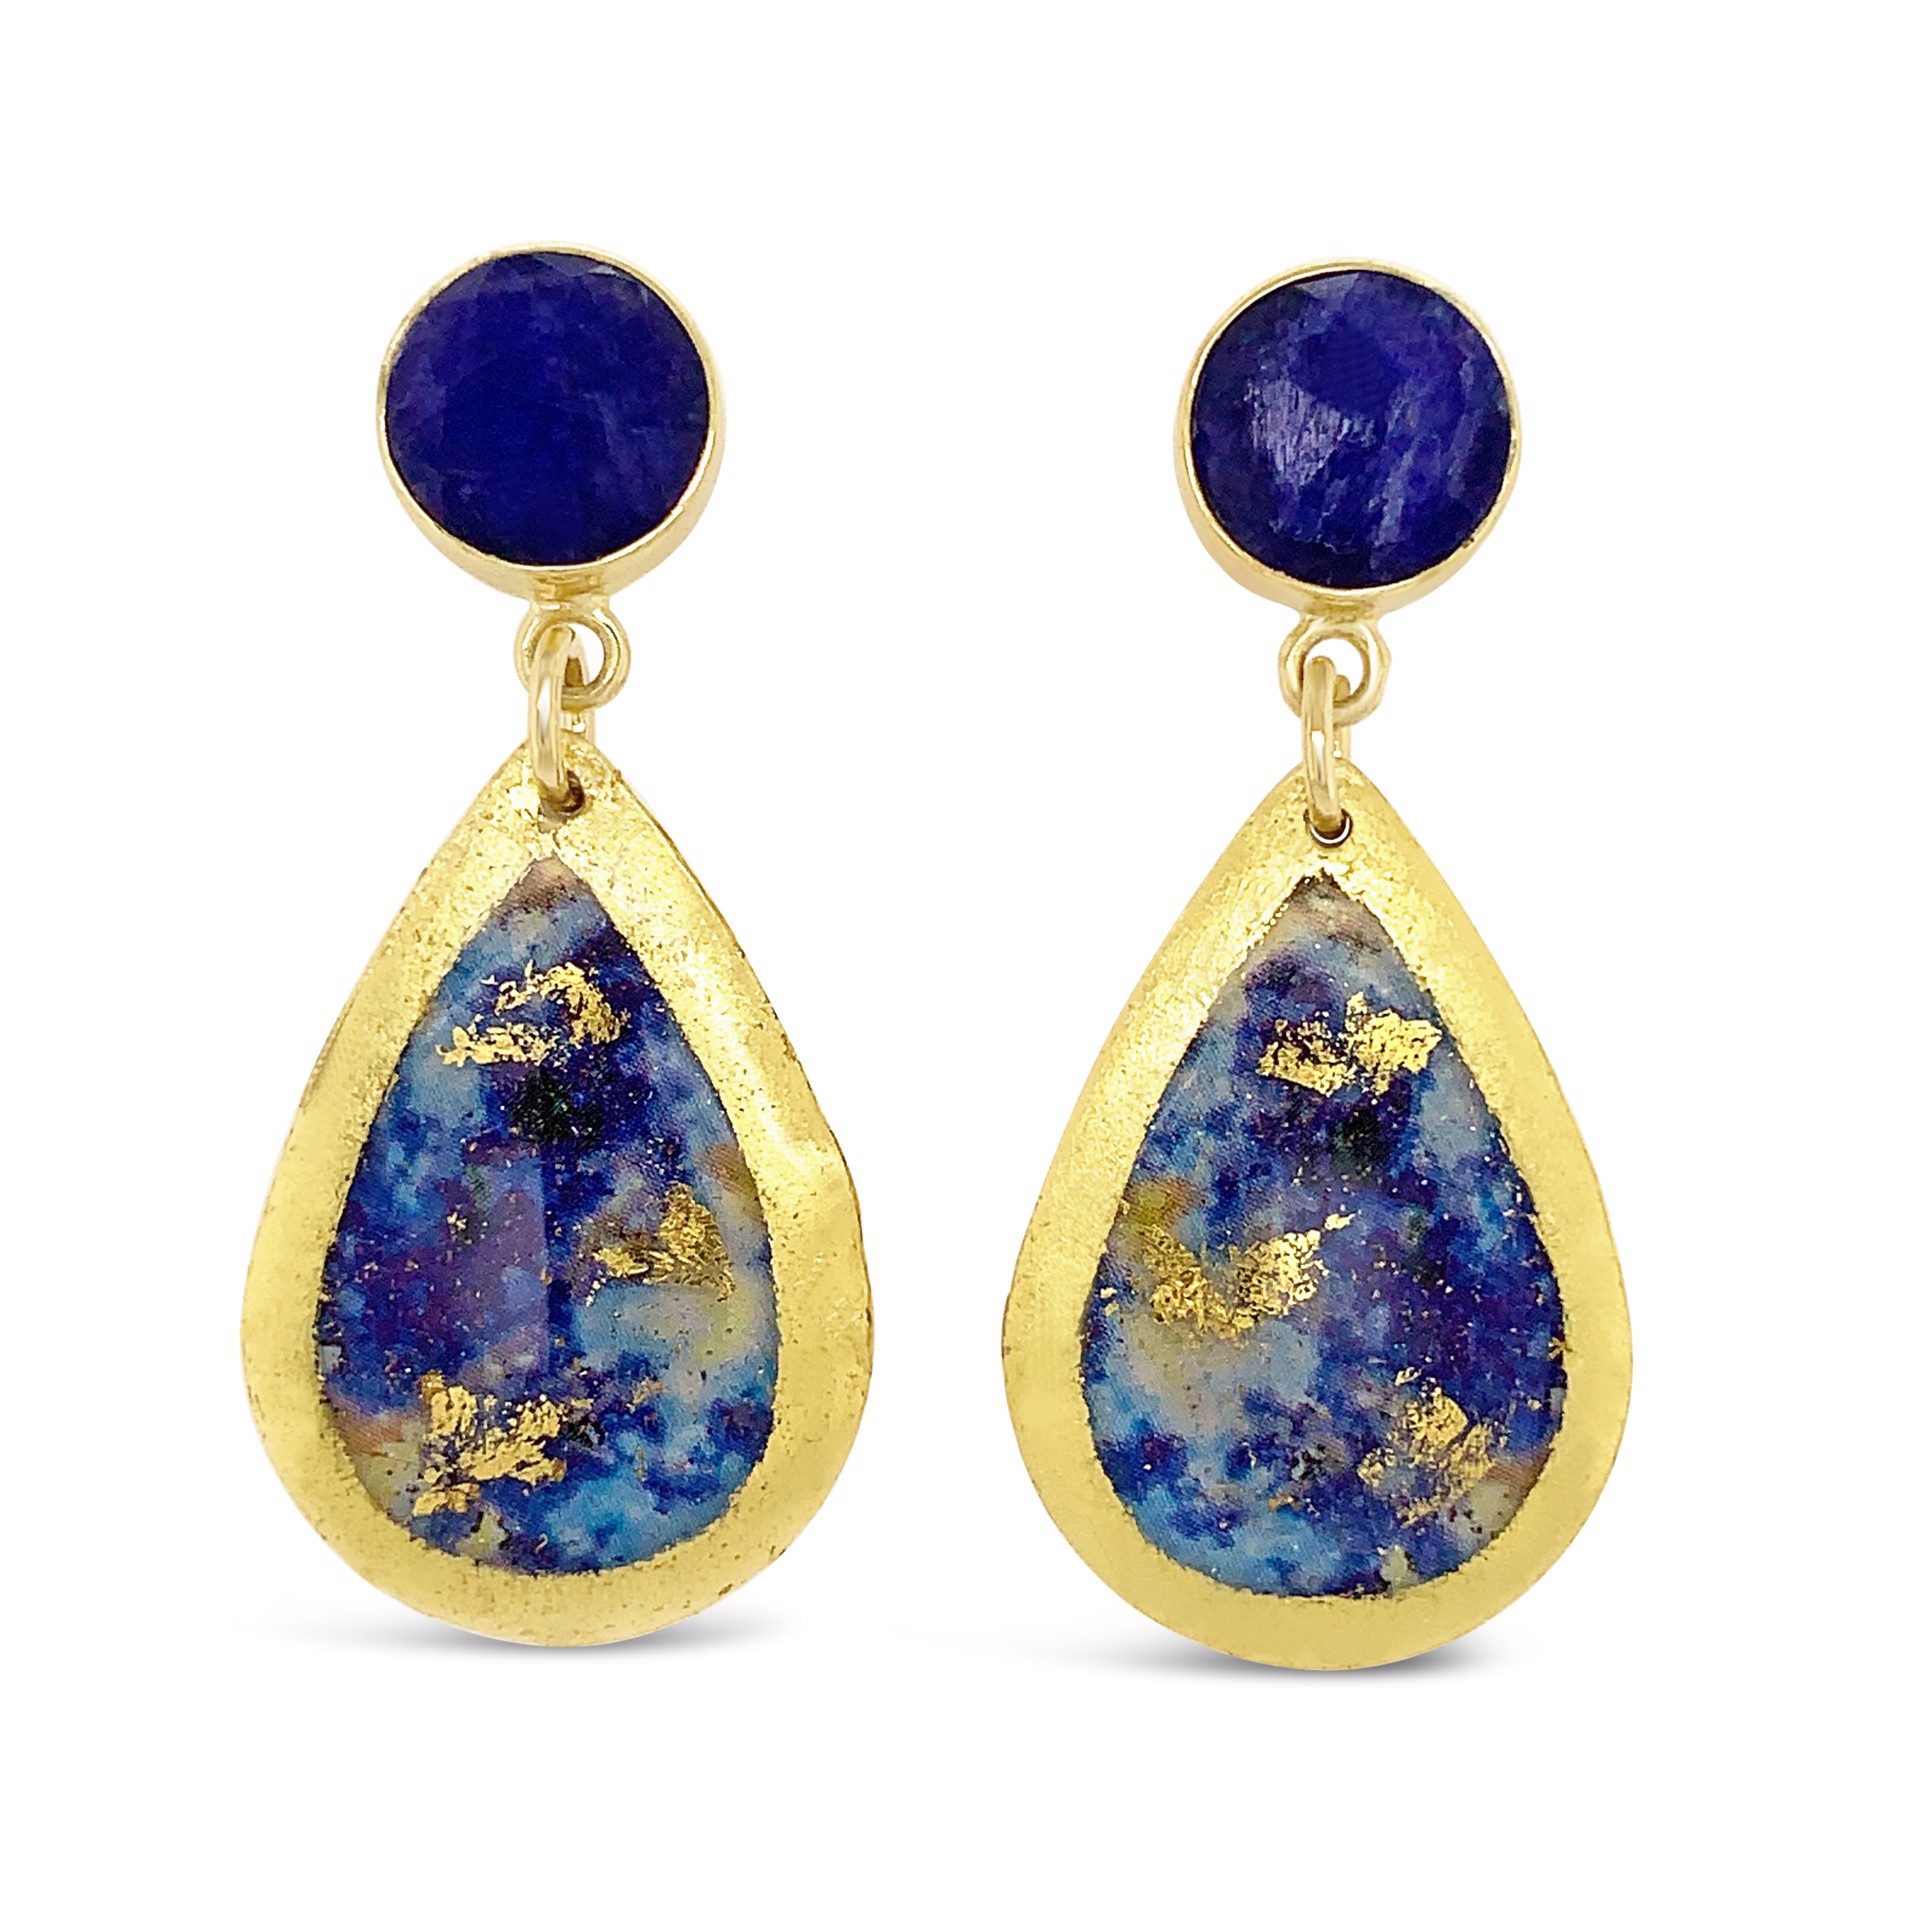 Lapis Small Teardrop Earrings - Sapphire Post - Gold by Evocateur